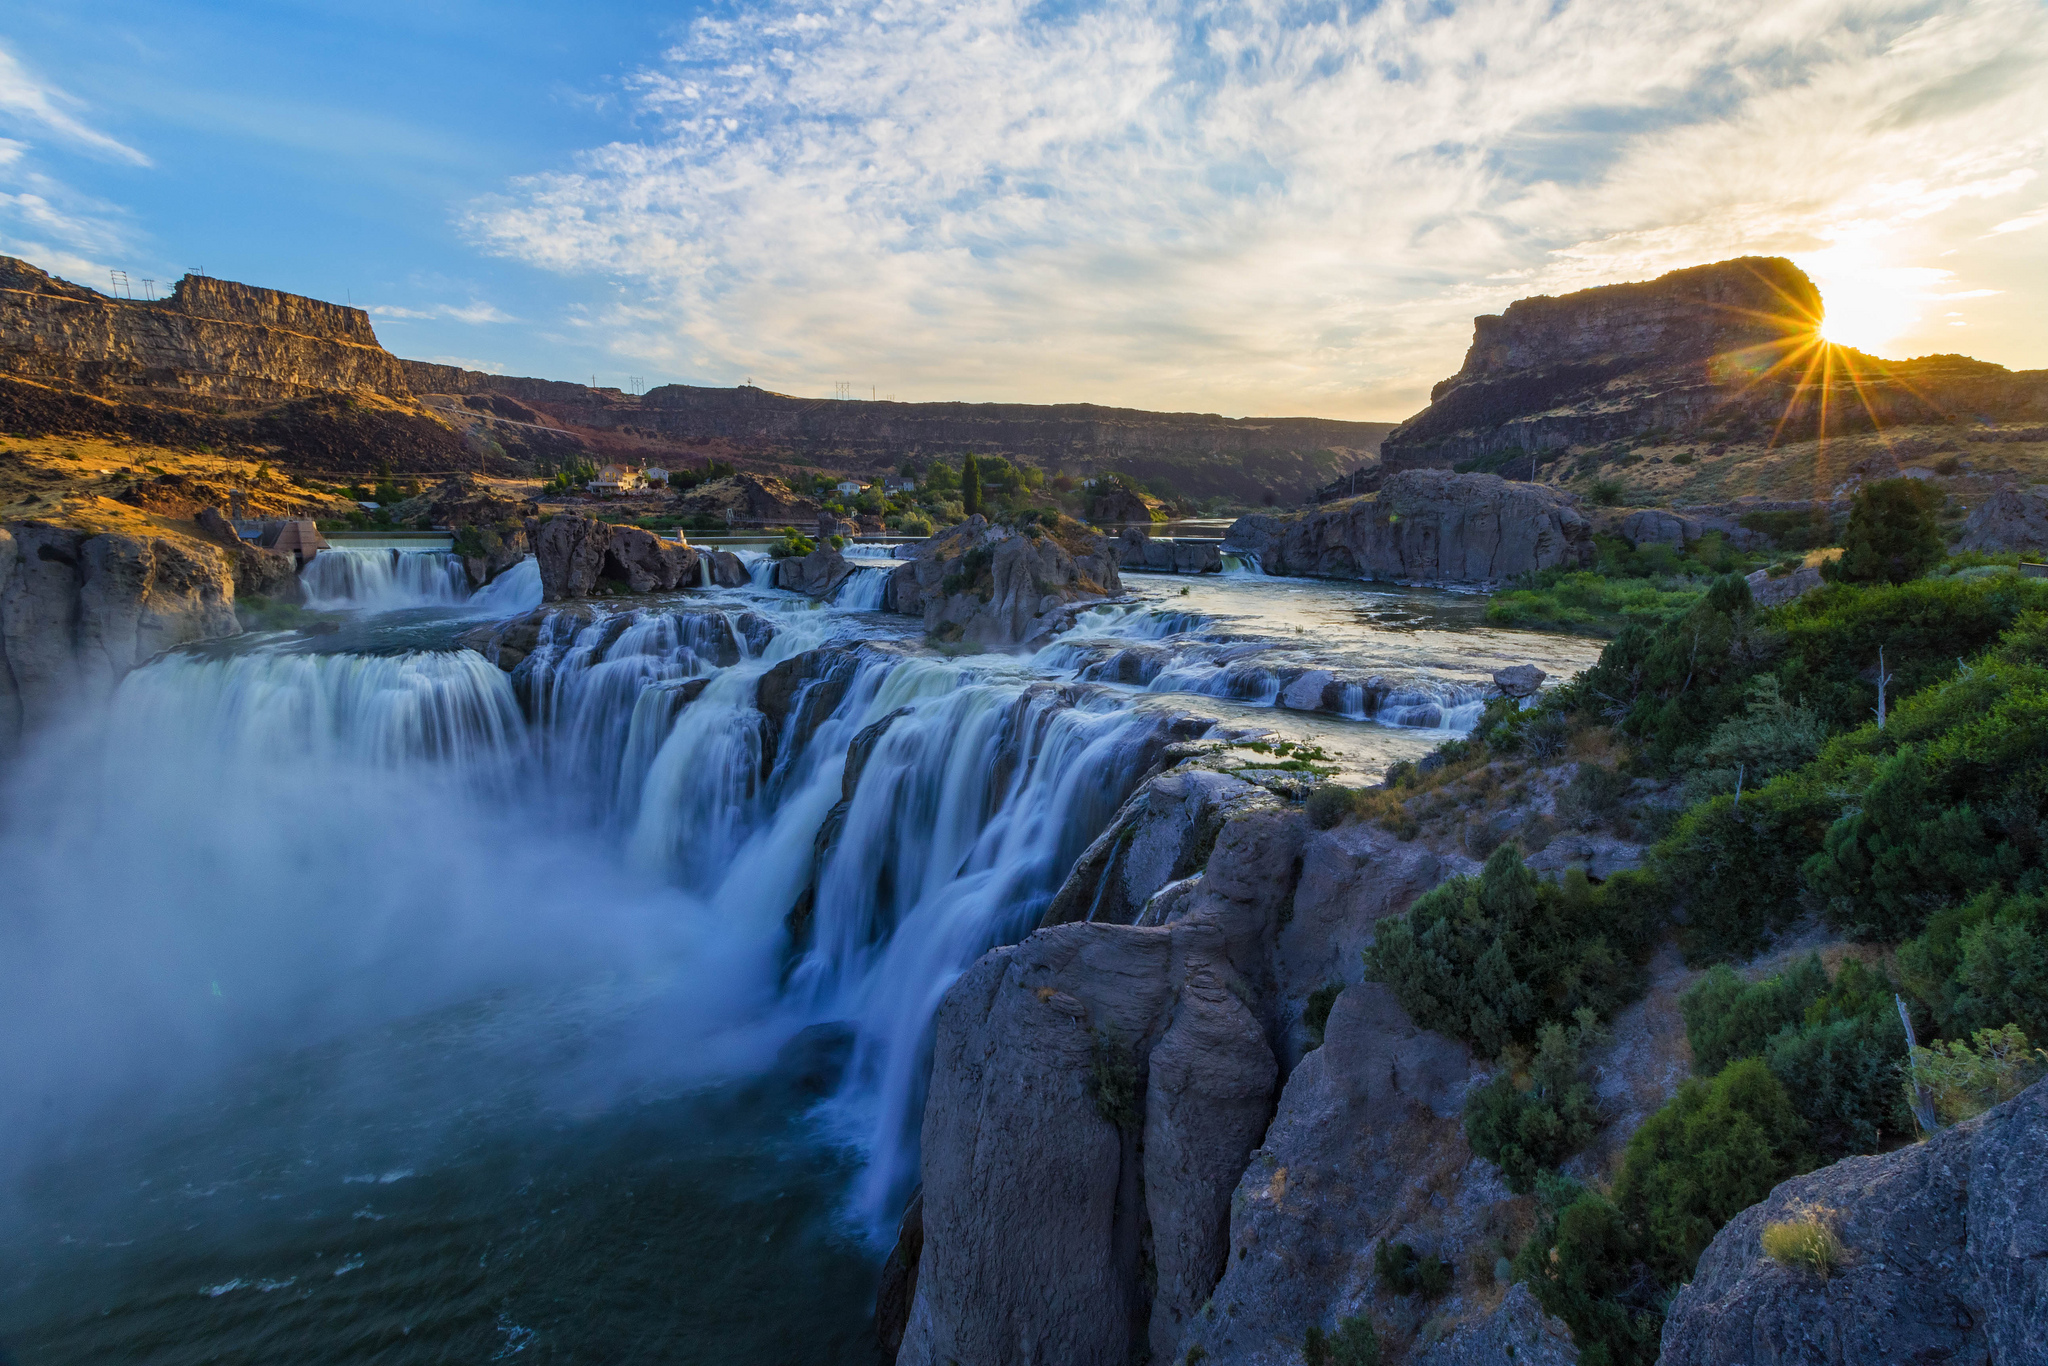 Shoshone Falls In Idaho Is The Most Epic Waterfall In The Northwest2048 x 1366